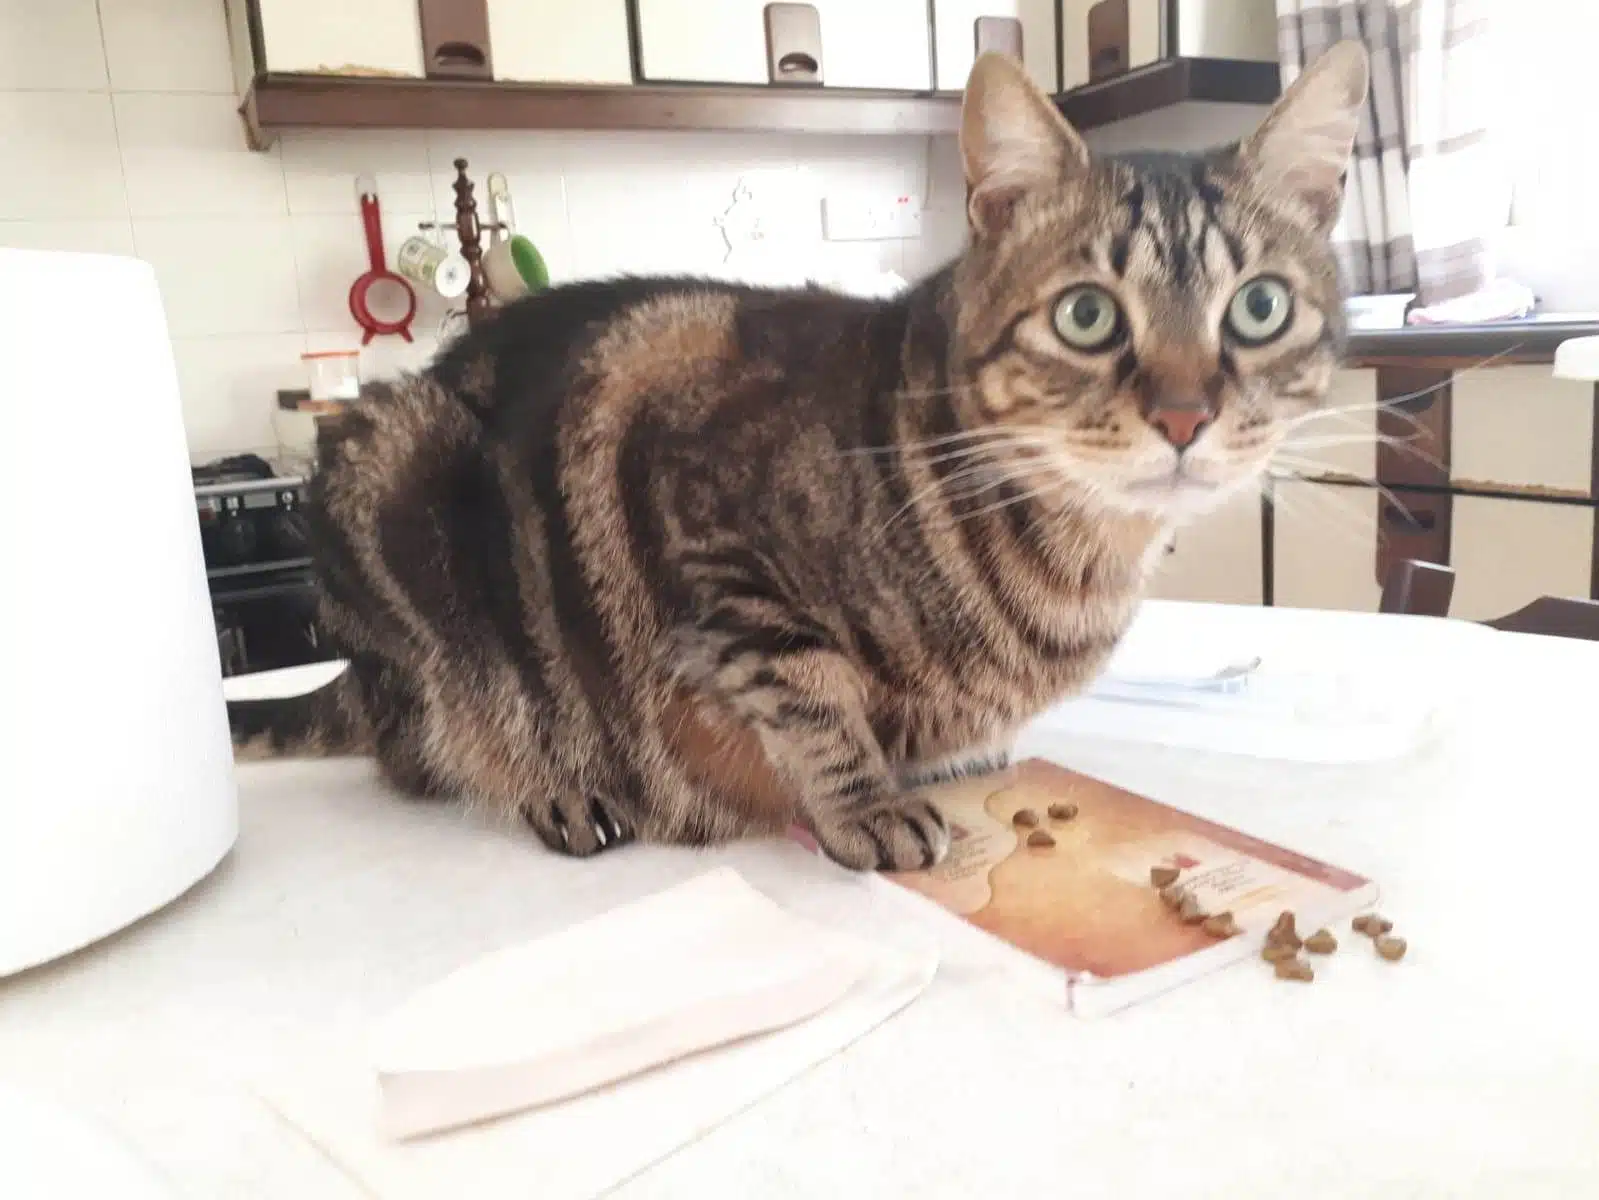 Meet Grizu, a 7-year-old neutered cat who lost his owner. CLAWS Cat Shelter is looking for a forever home for him. Adopt or donate to support Grizu and other cats in need! 🐾❤️